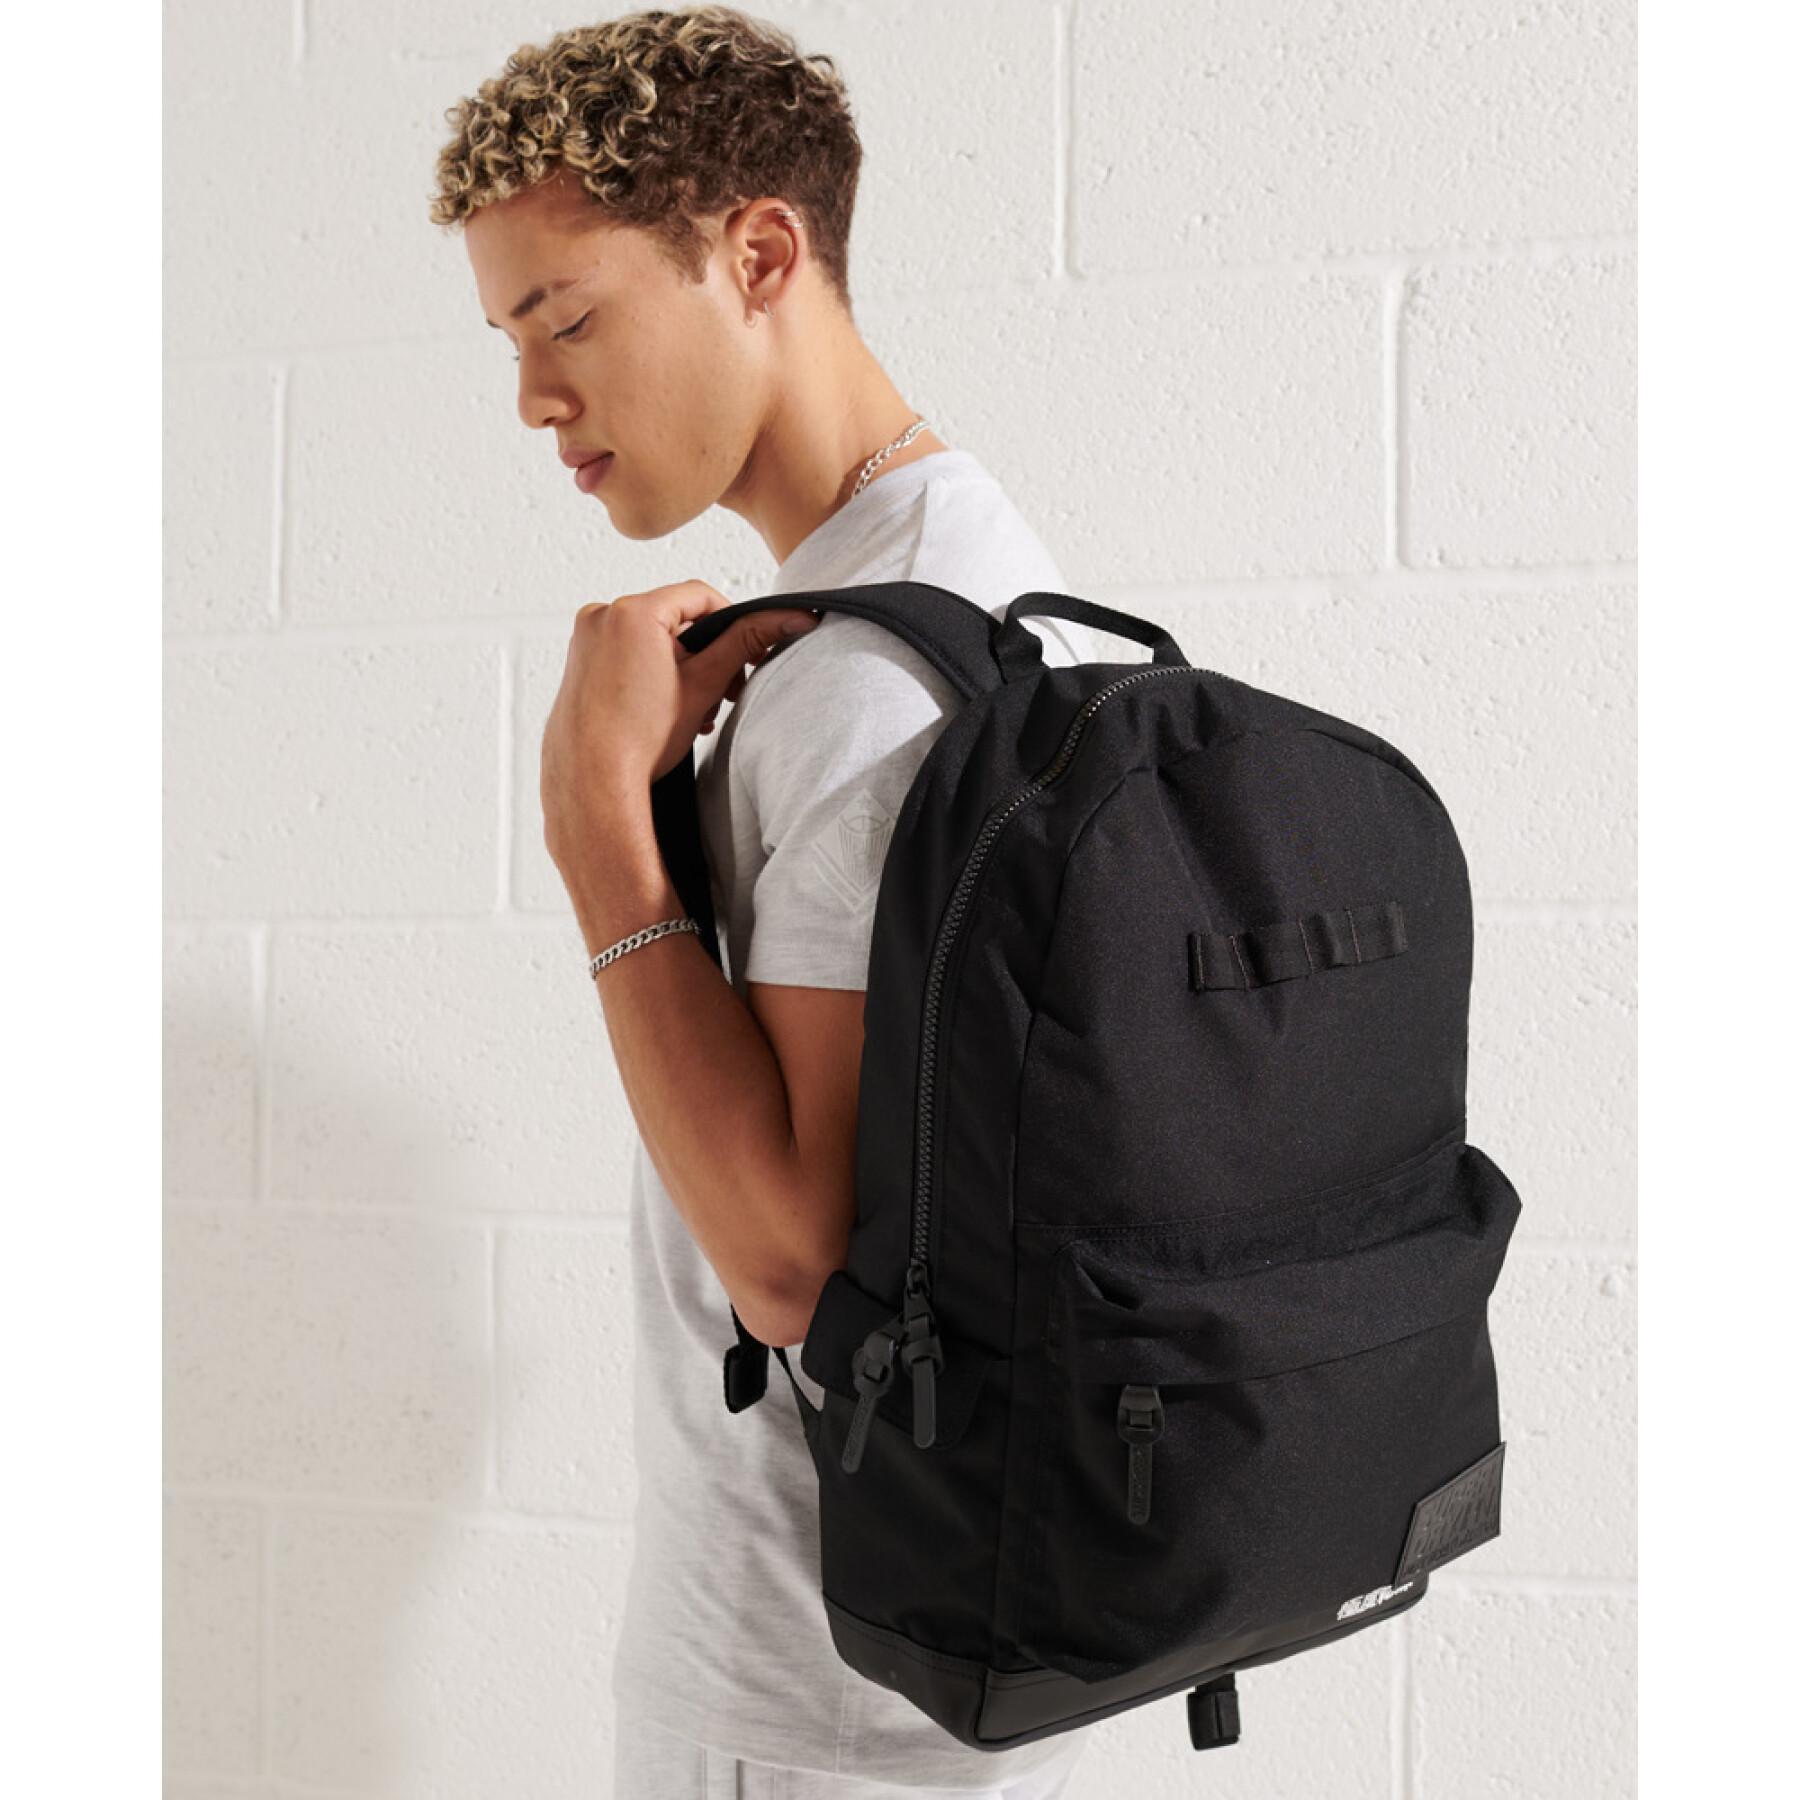 Rucksack Superdry Expedition Montana